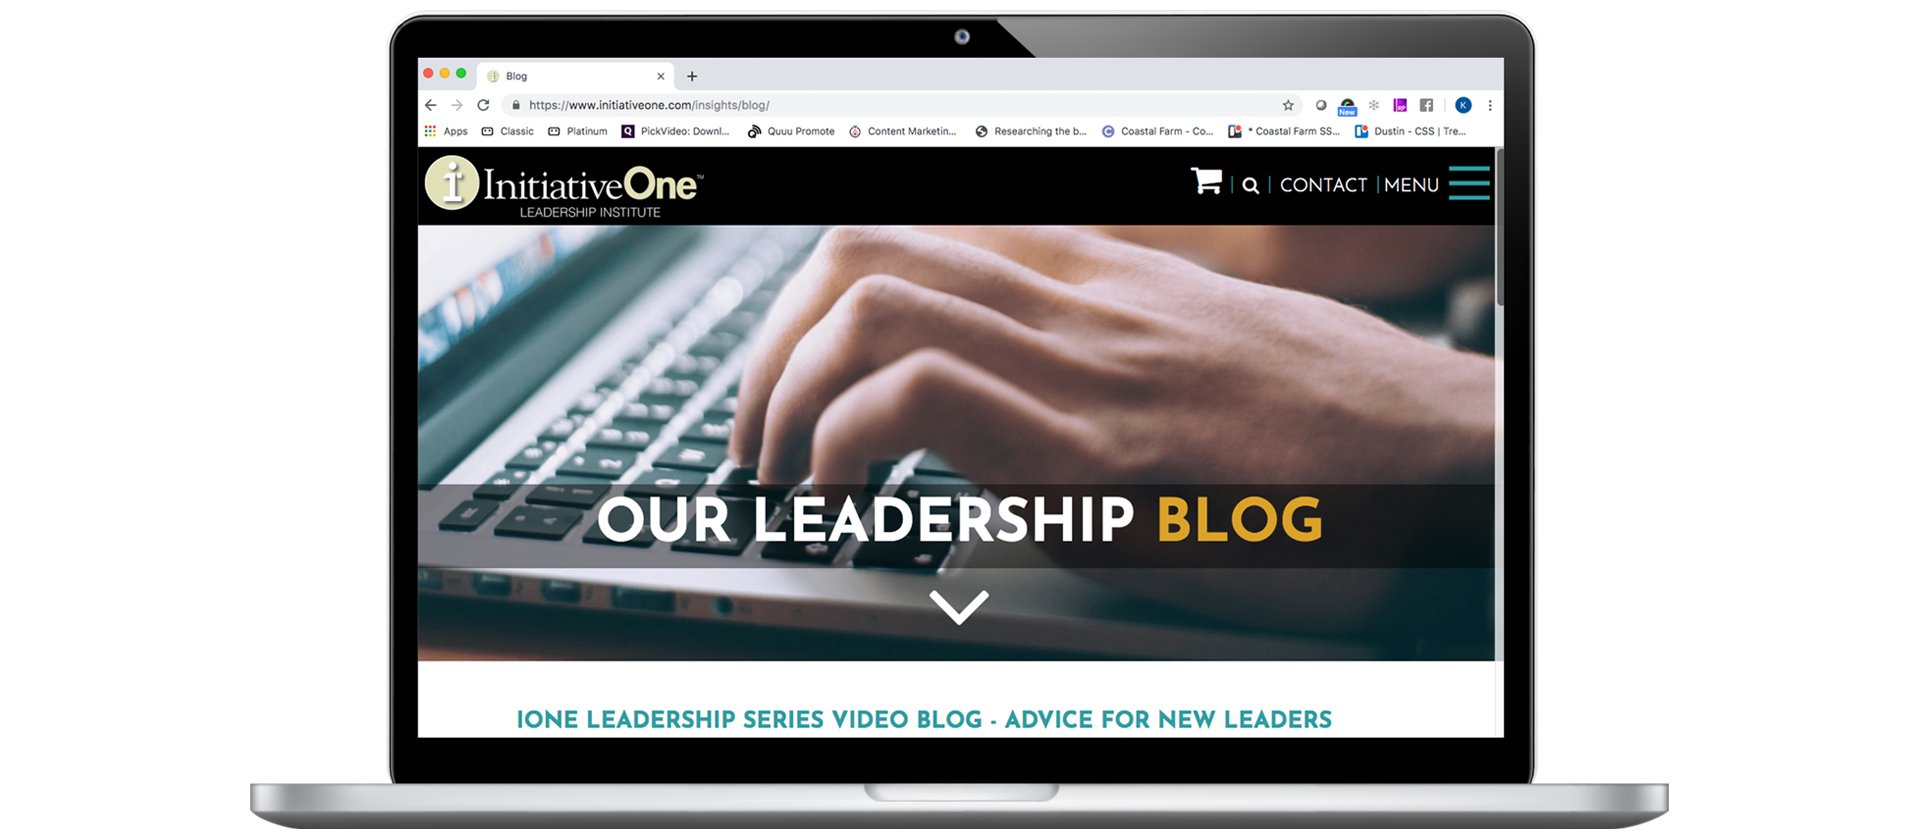 InitiativeOne Client Story: Content Marketing Drives Leads